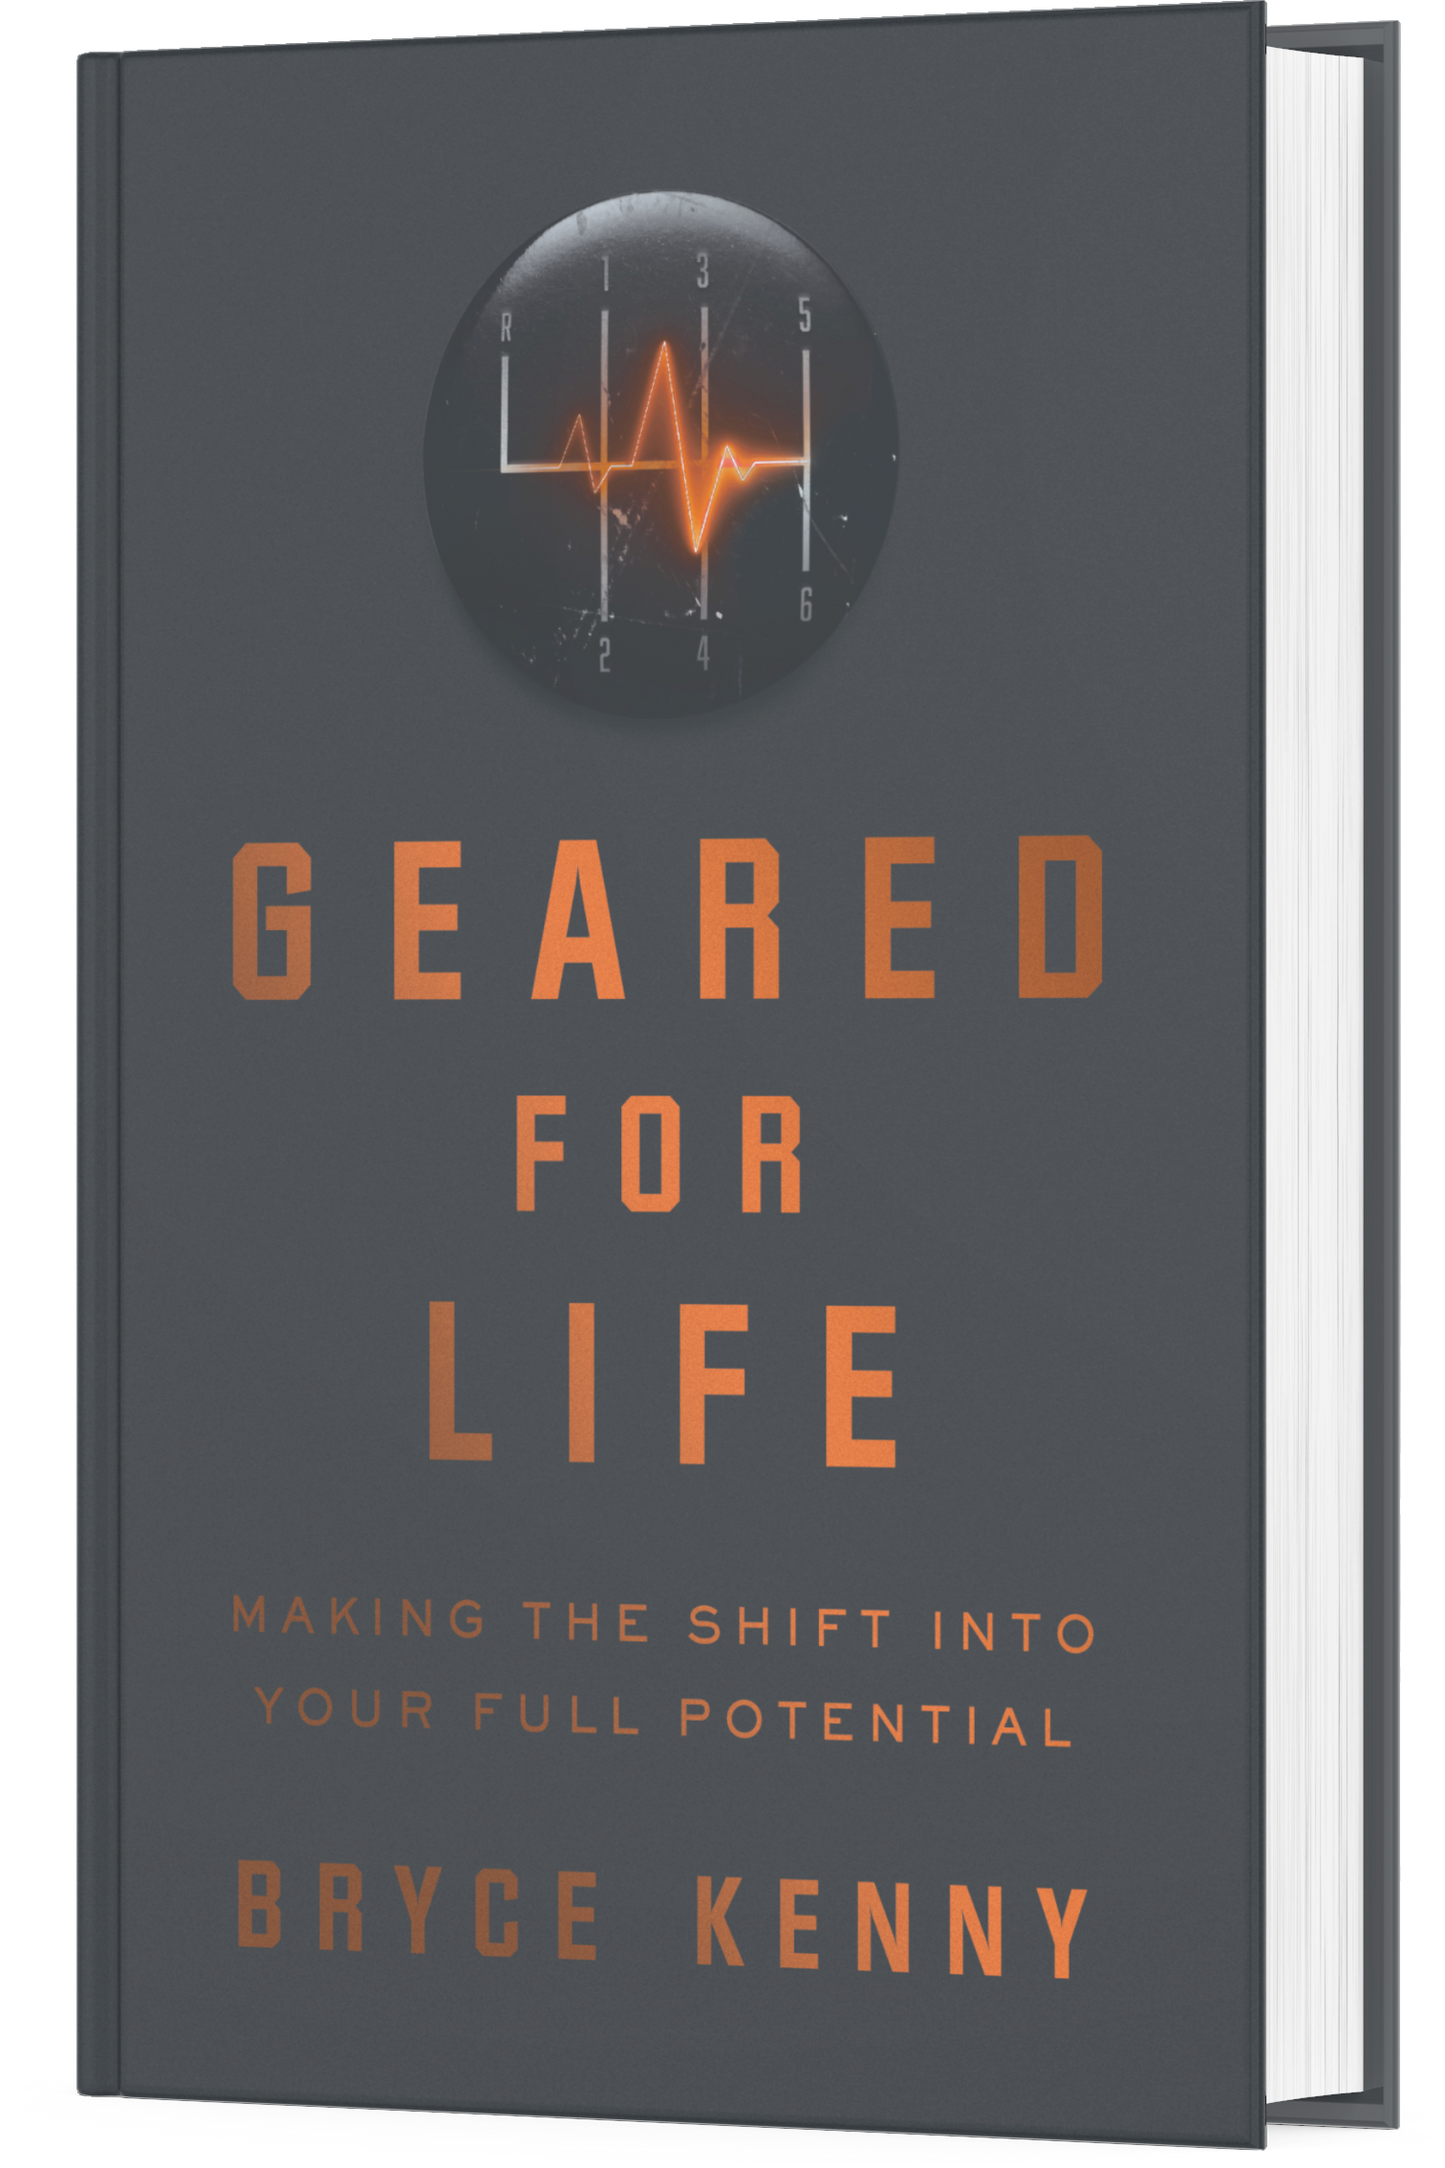 Geared for Life: Making the Shift Into Your Full Potential